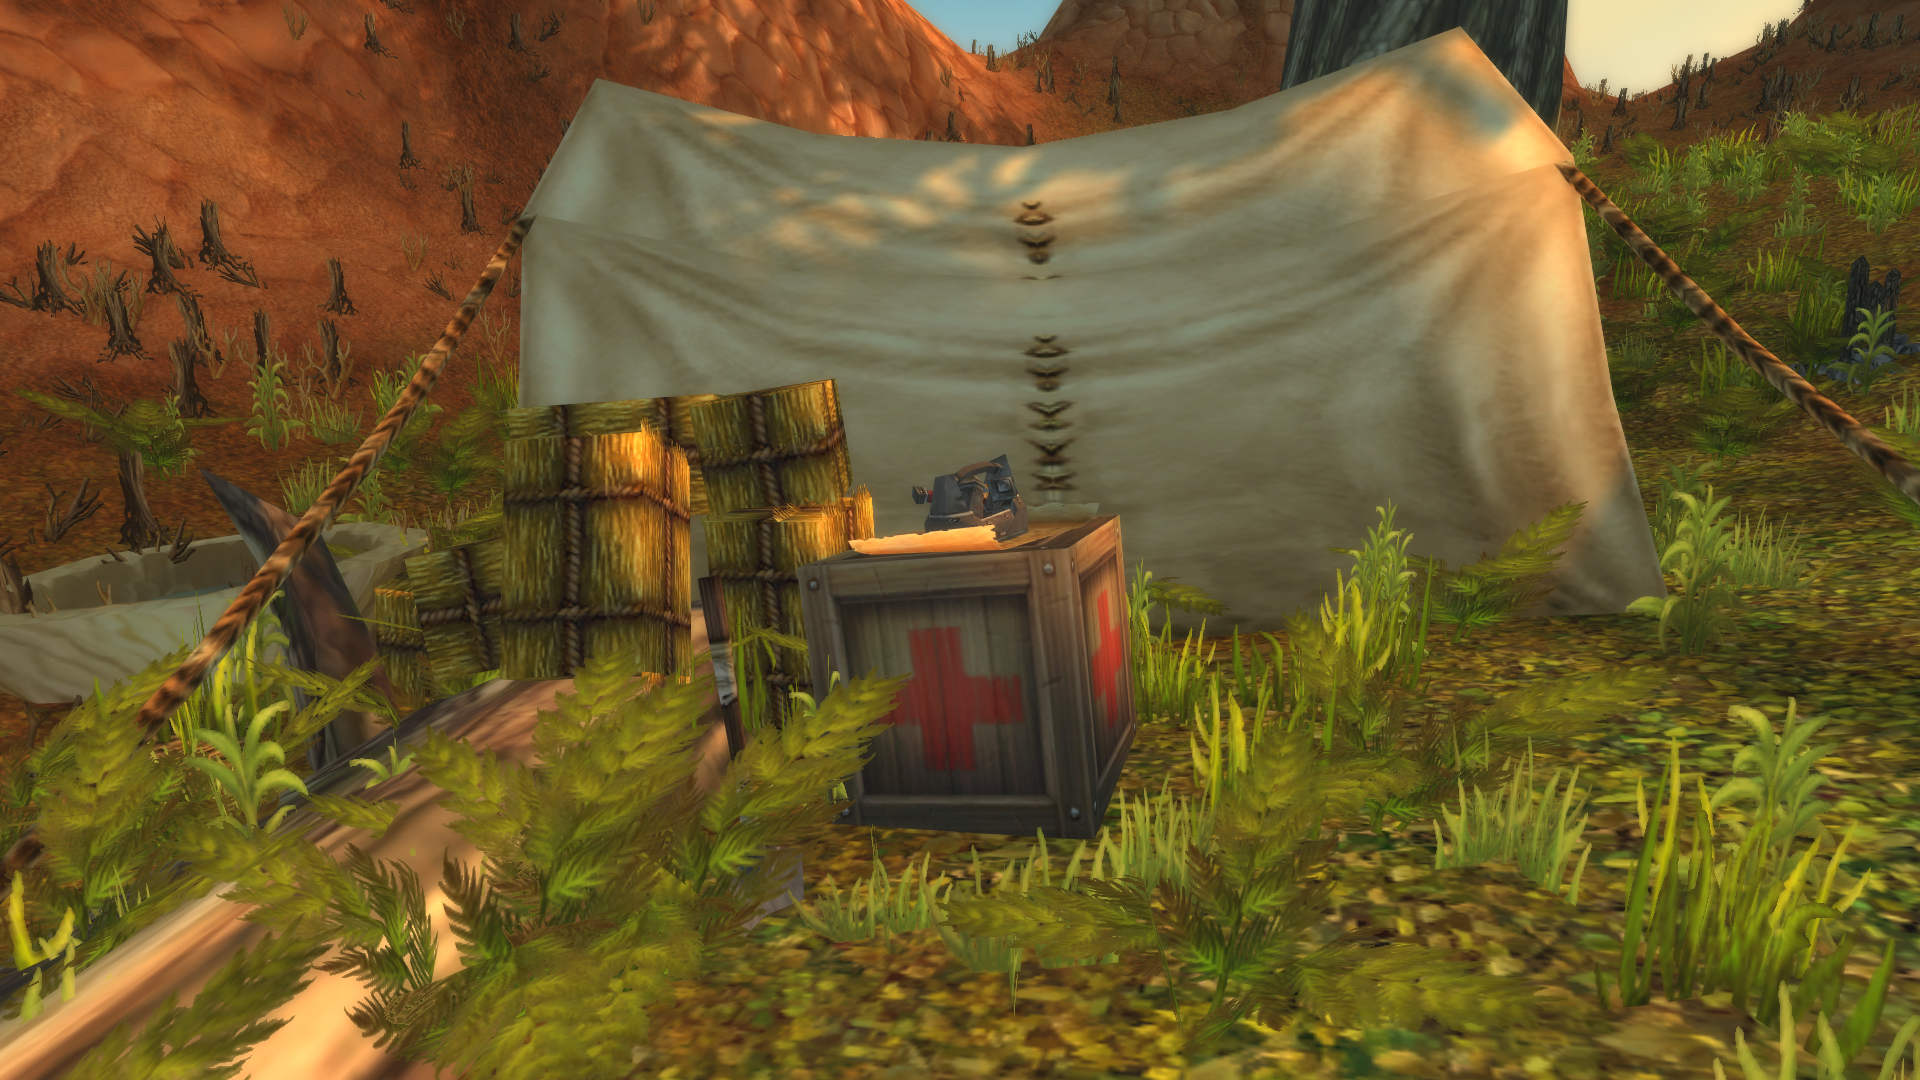 How to get the Cozy Sleeping Bag in WoW Classic Season of Discovery